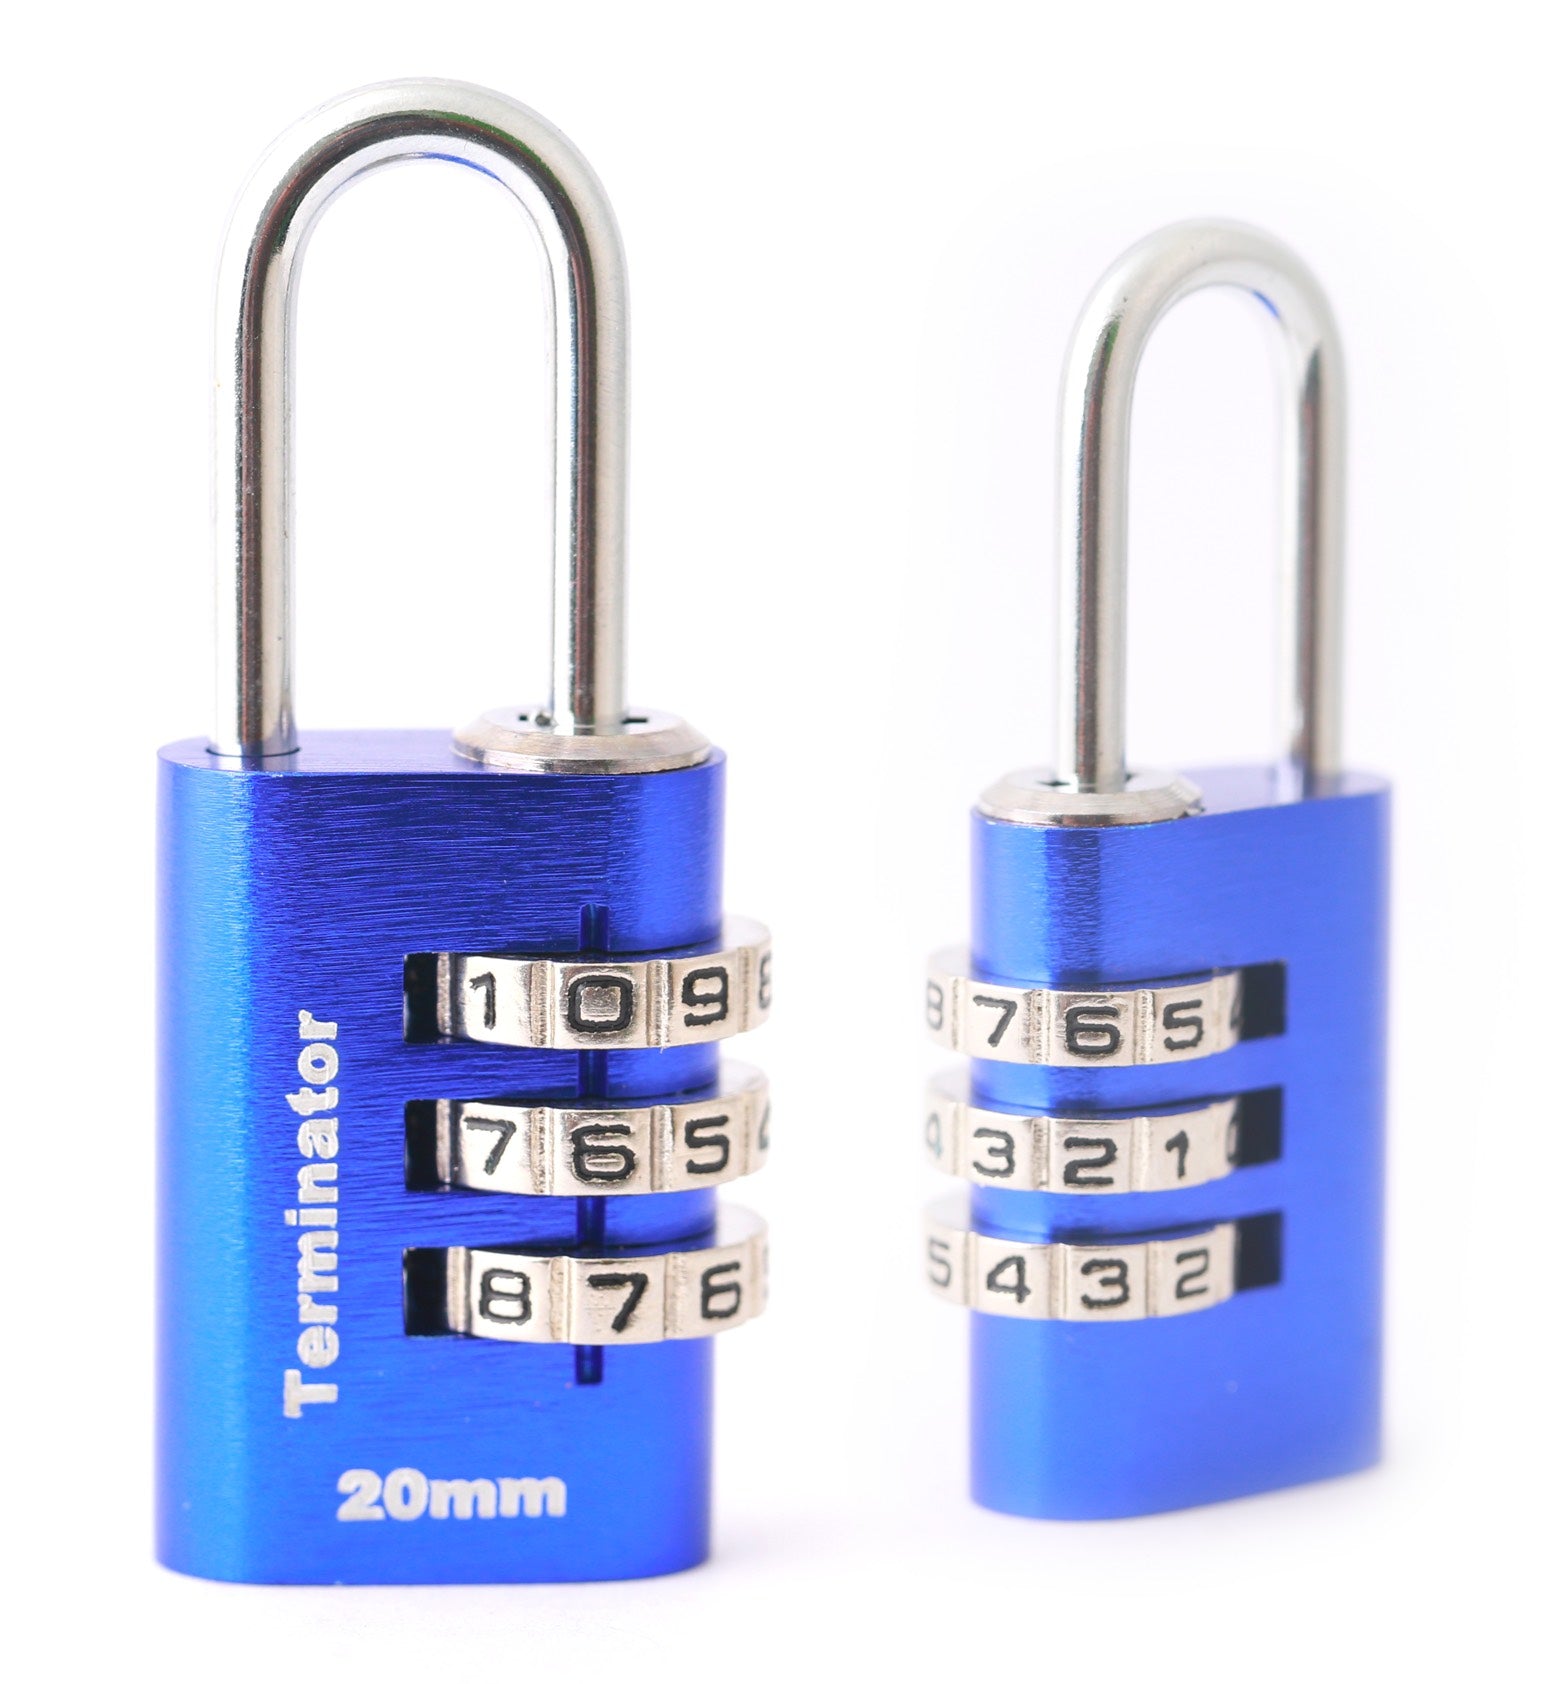 Terminator Combination pad lock with sealed blister packing (20mm) 
Available in Blue, Green, Red & Silver colors - Alibhai Shariff Direct